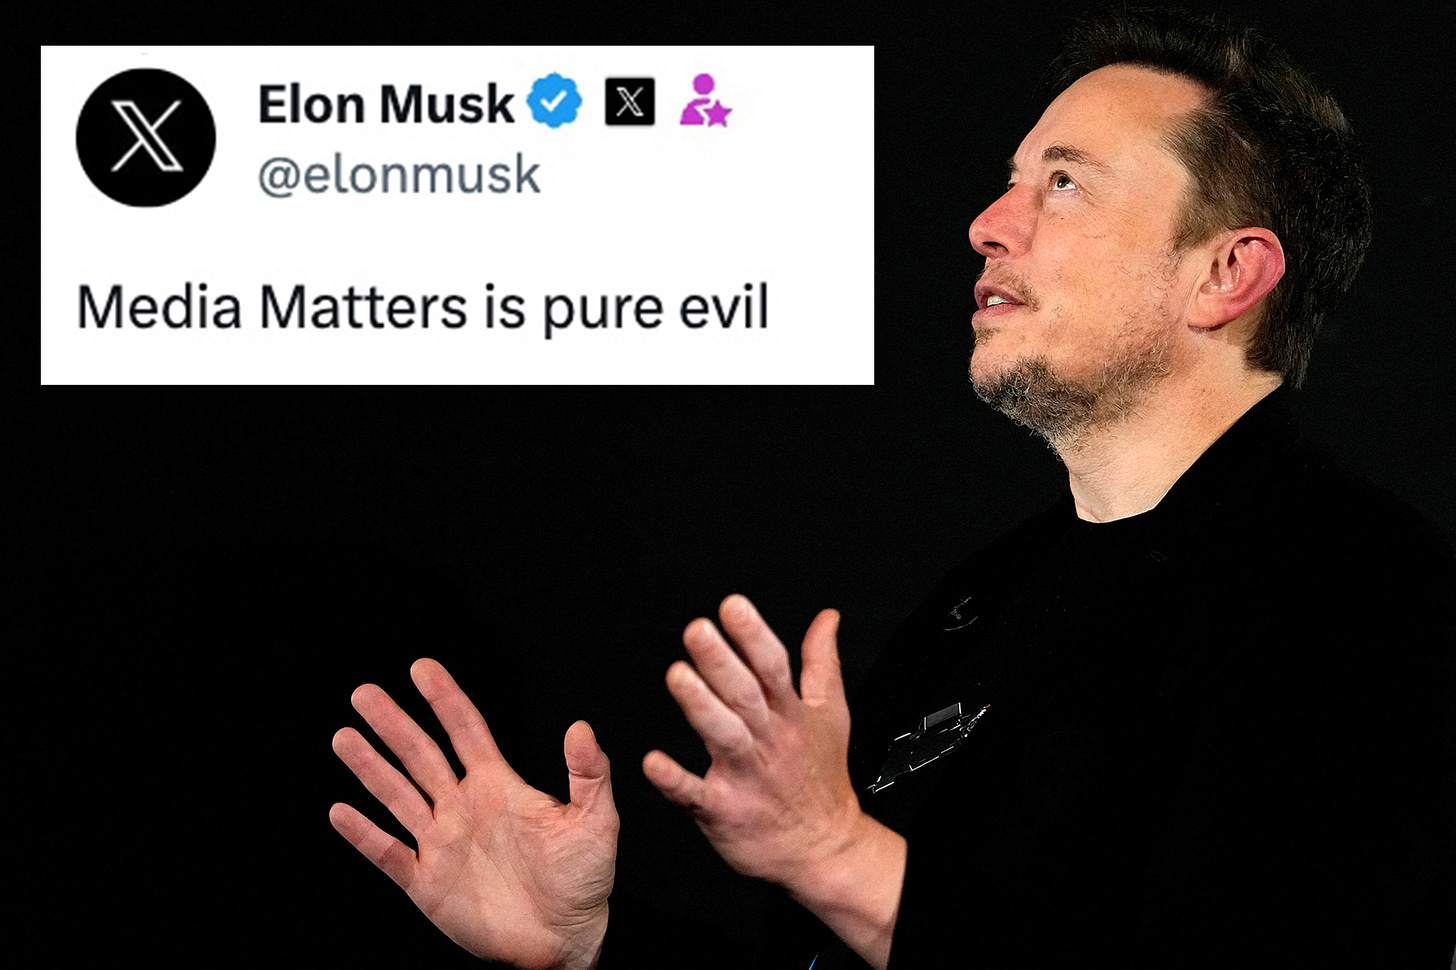 Elon Musk vows 'thermonuclear lawsuit' against Media Matters